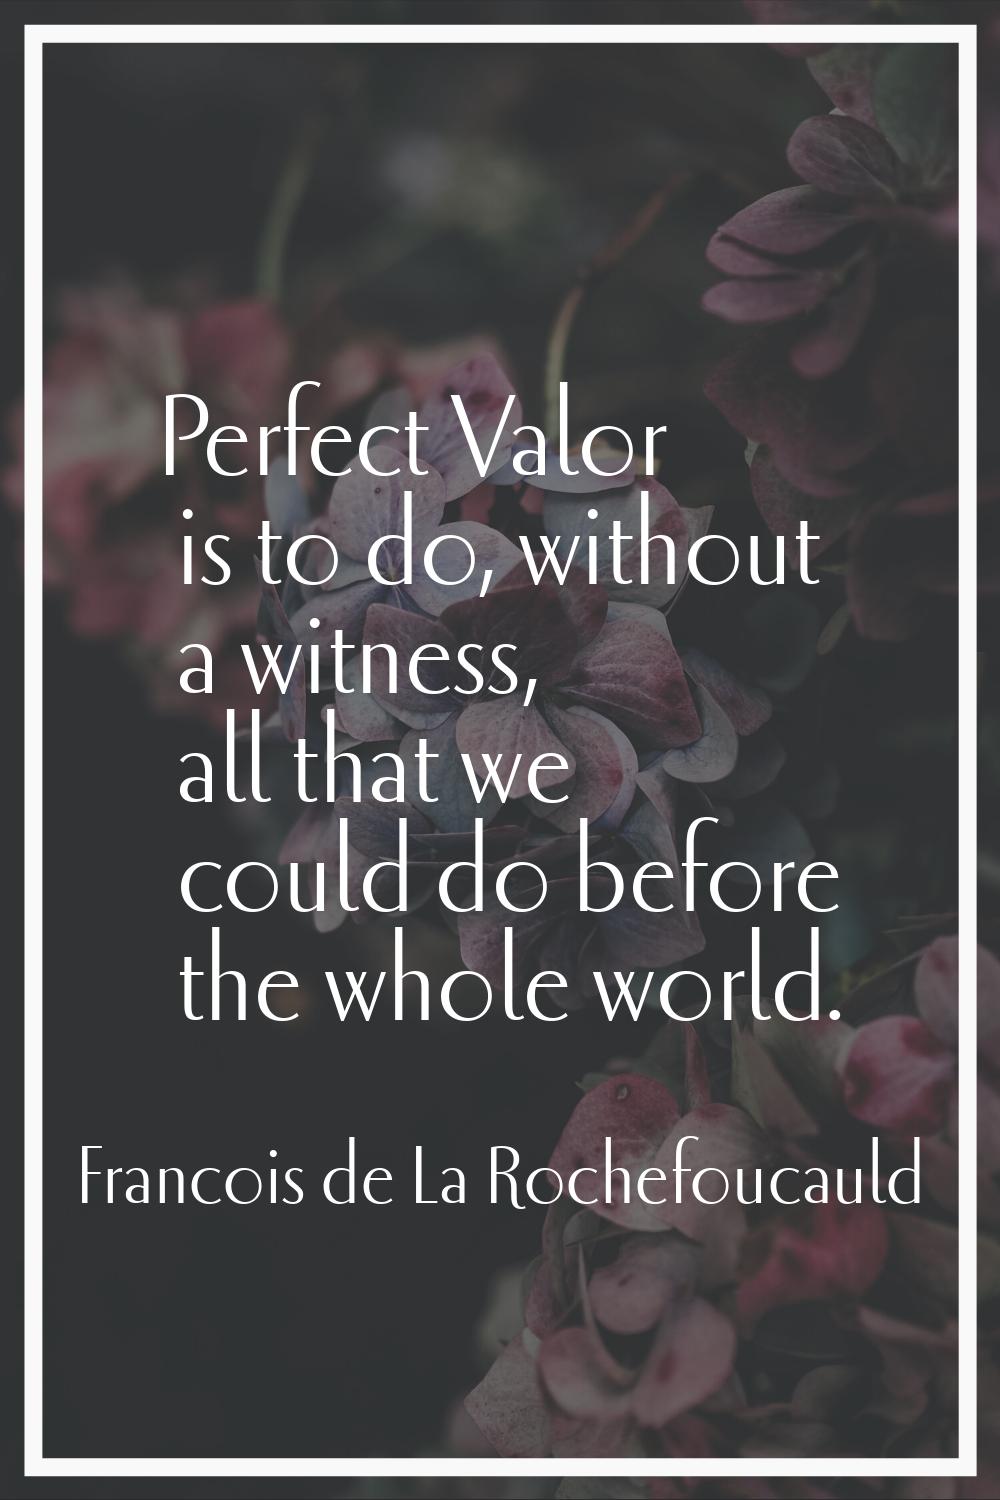 Perfect Valor is to do, without a witness, all that we could do before the whole world.